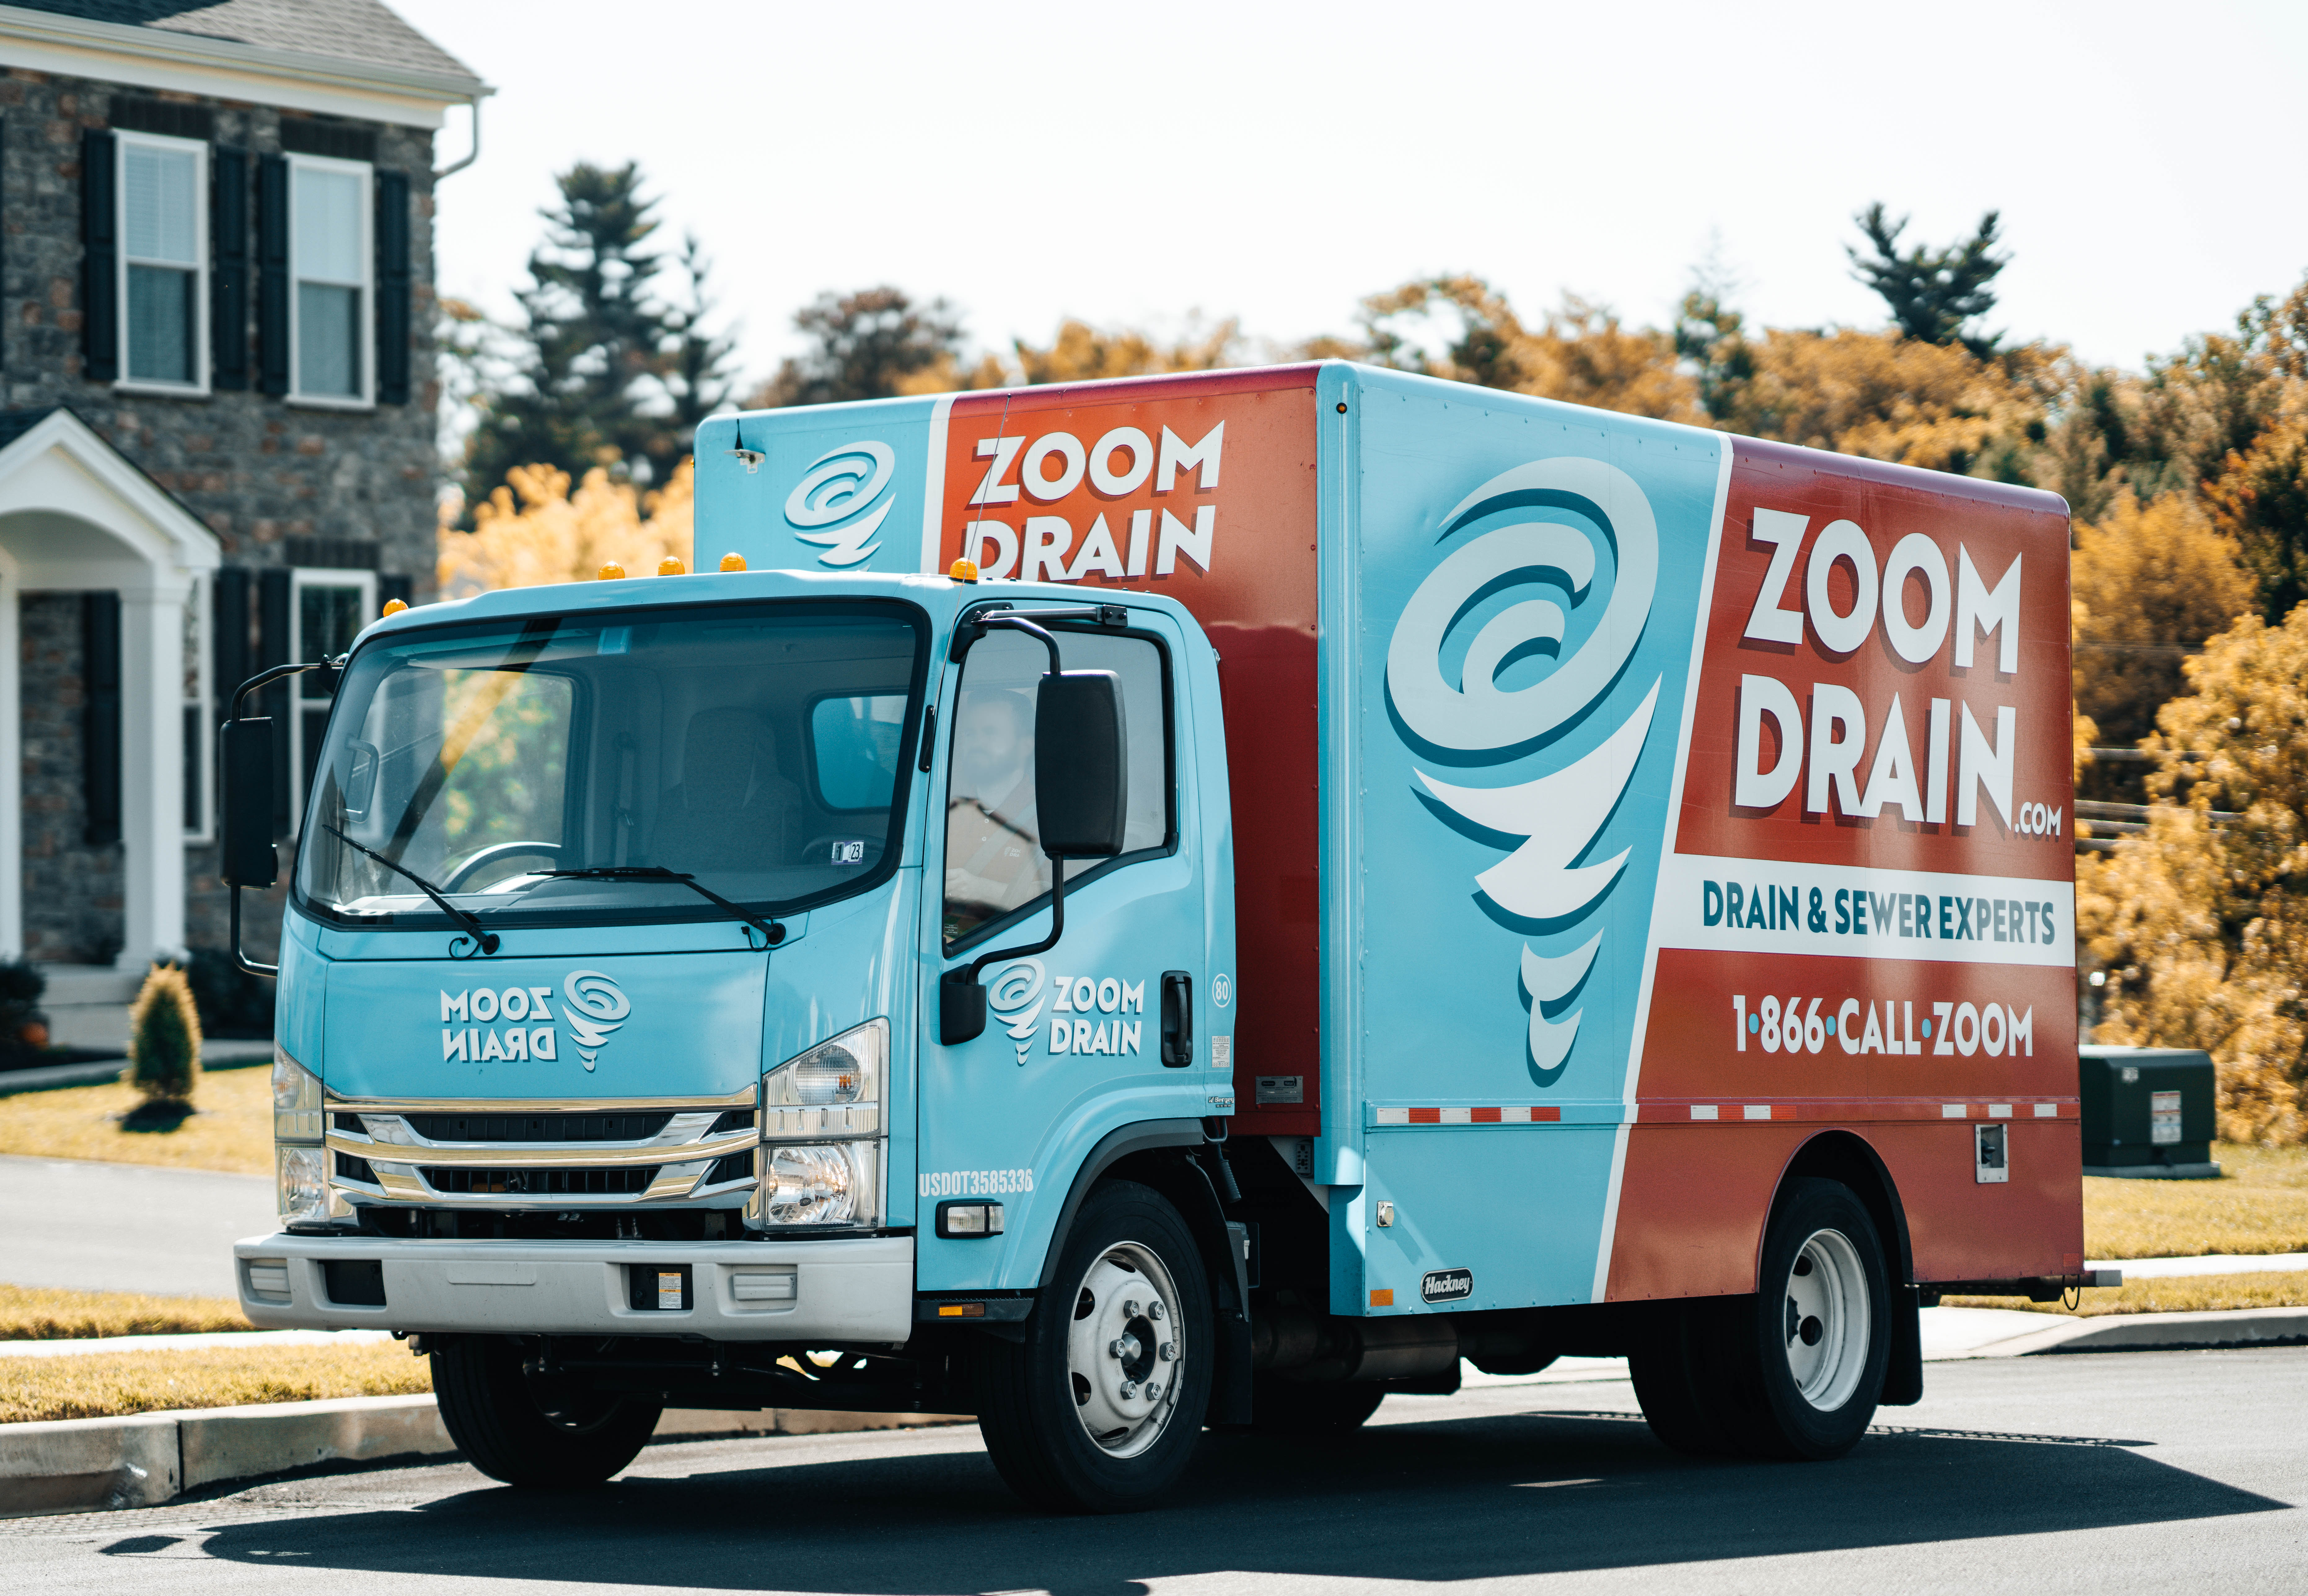 Now Open: Get To Know The Owner Of Zoom Drain Pittsburgh!